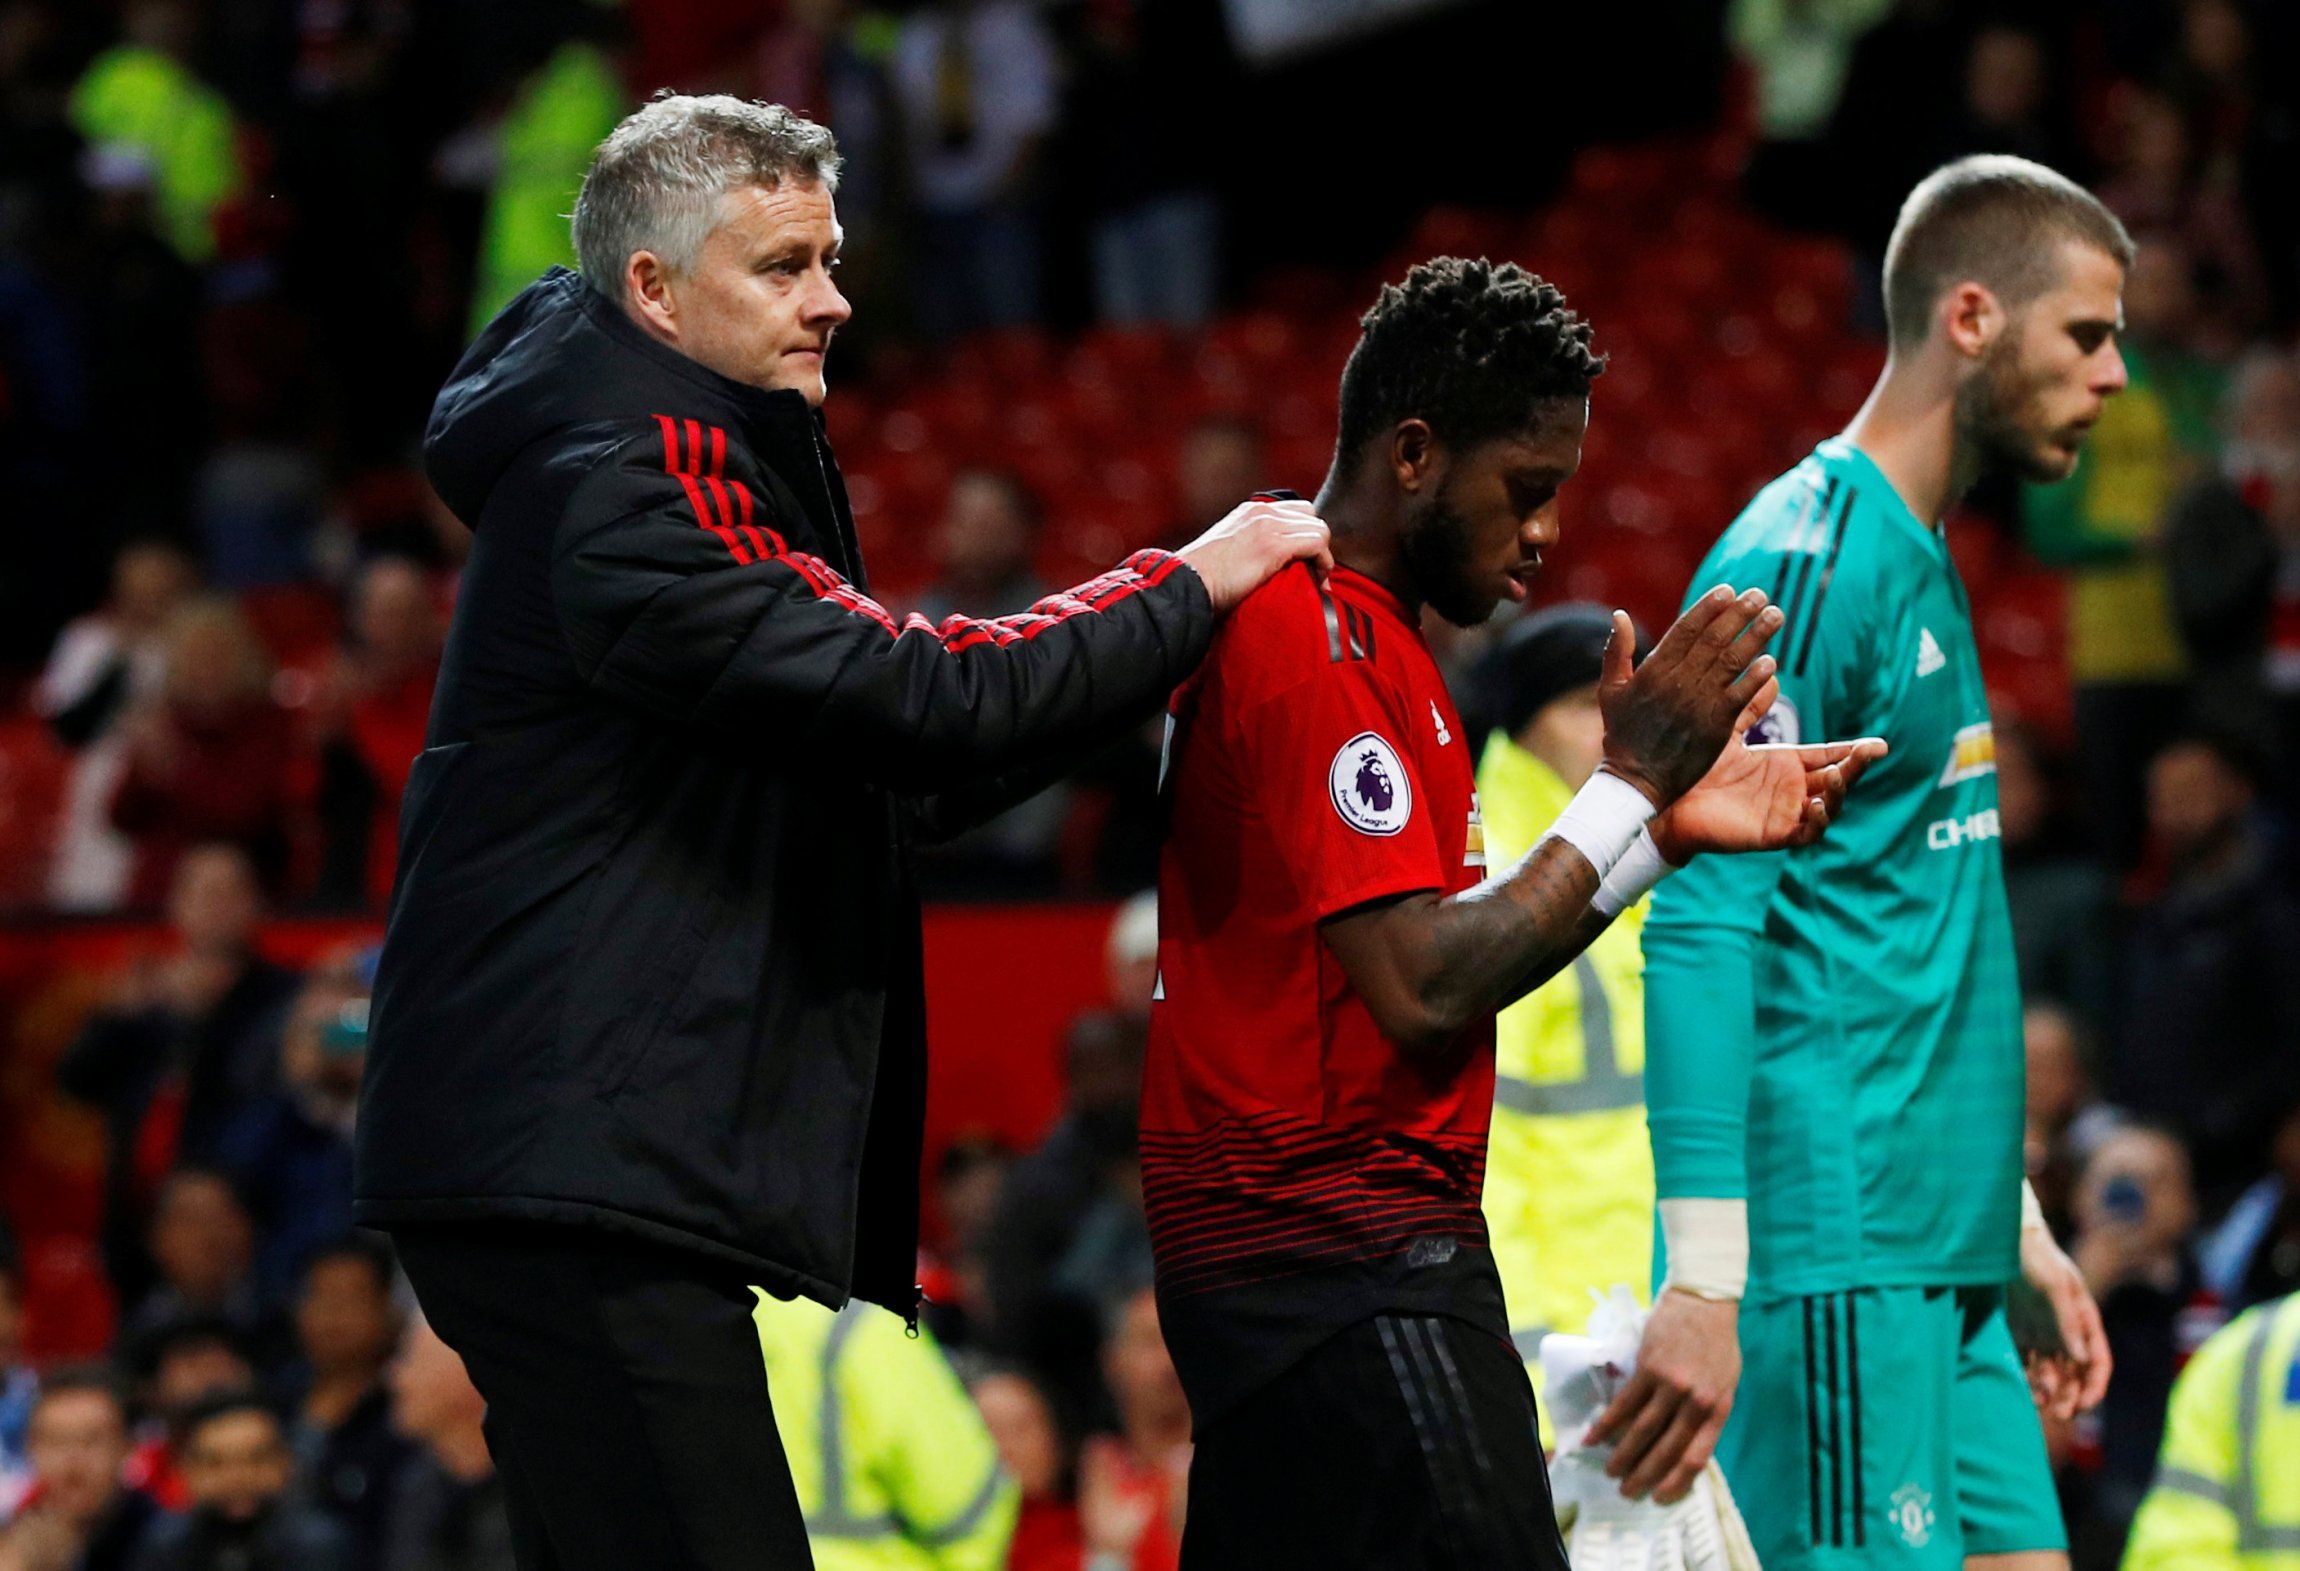 Manchester United manager Ole Gunnar Solskjaer consoles midfielder Fred after Manchester City defeat